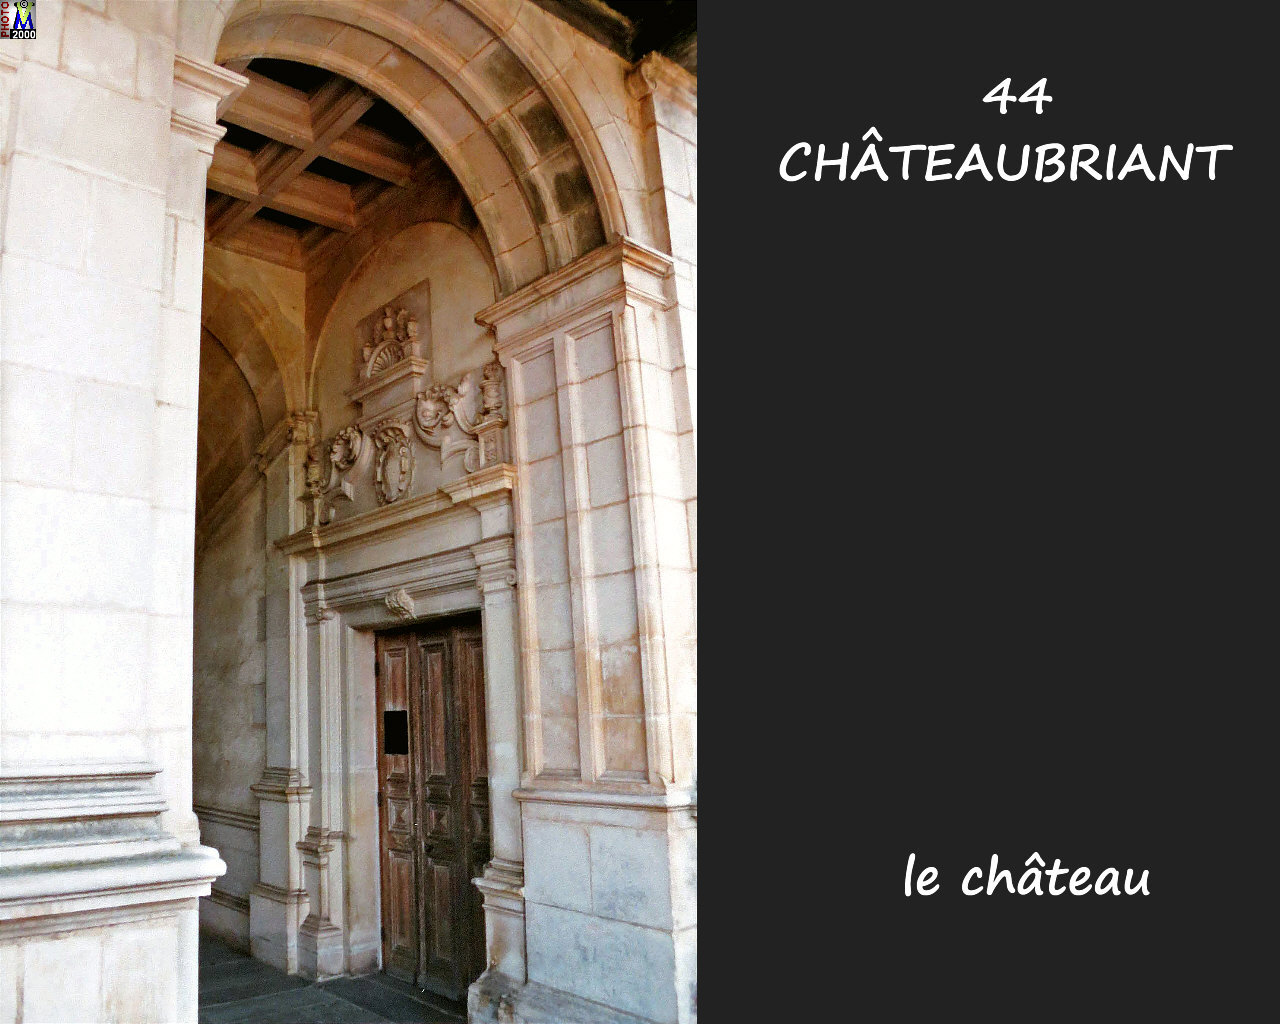 44CHATEAUBRIANT_chateau_220.jpg